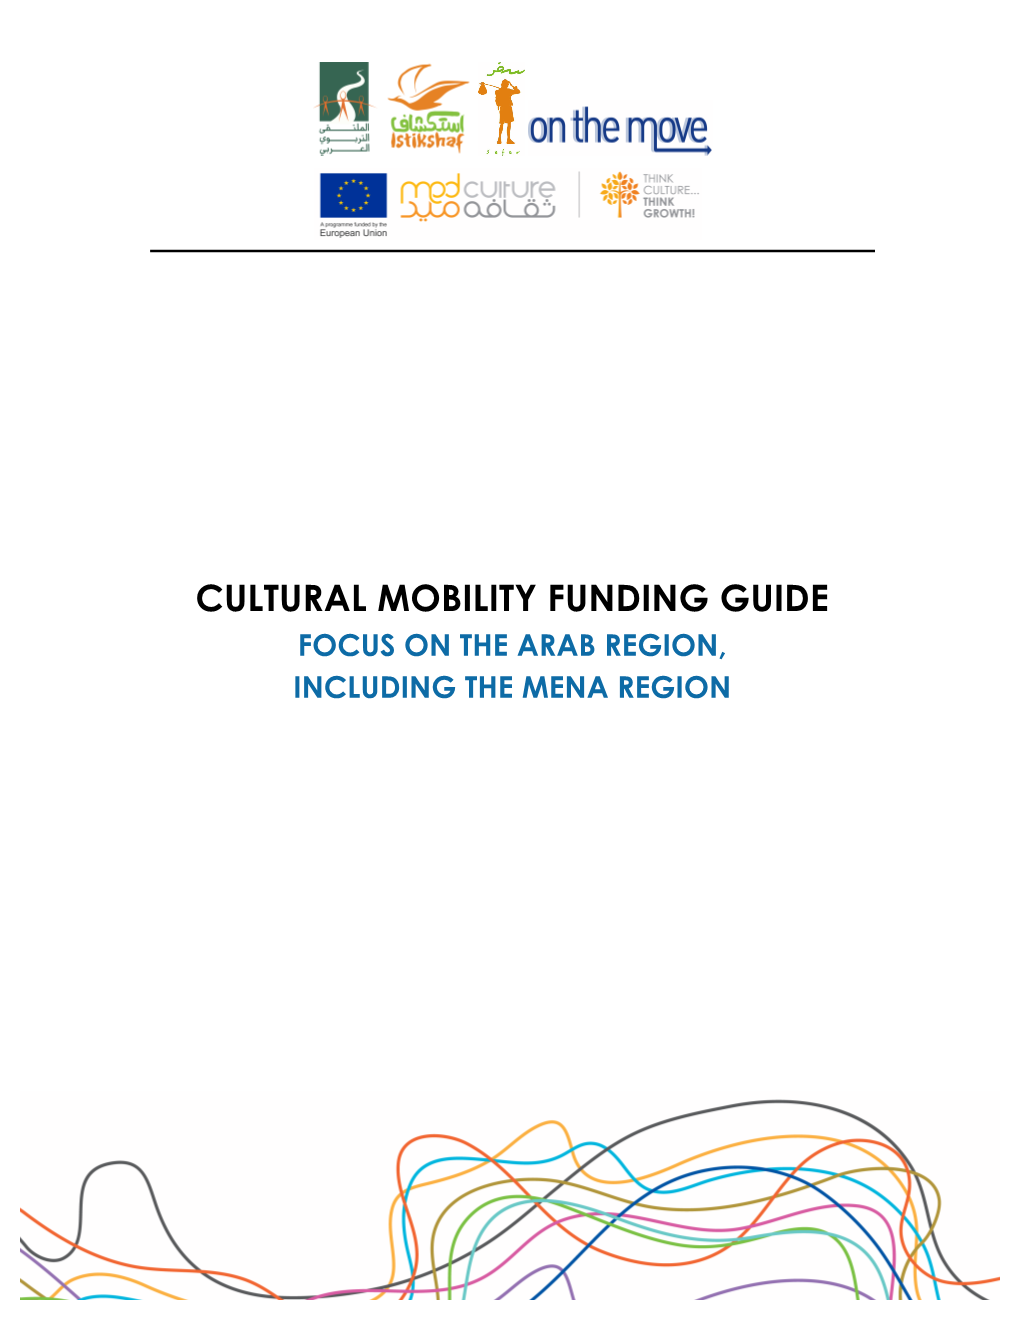 Cultural Mobility Funding Guide Focus on the Arab Region, Including the Mena Region